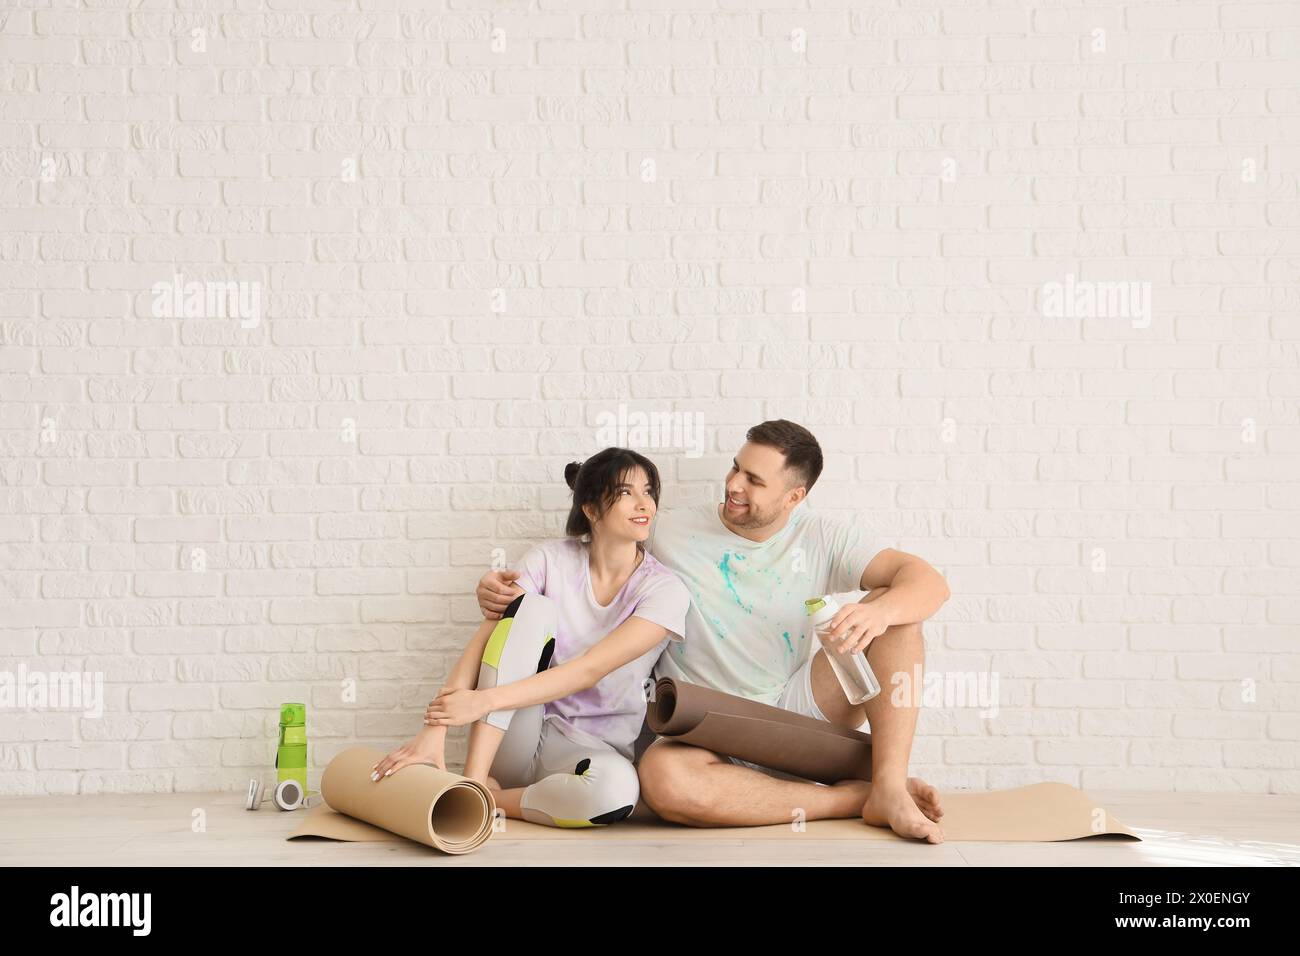 Sporty young couple sitting on yoga mat after training in light room Stock Photo